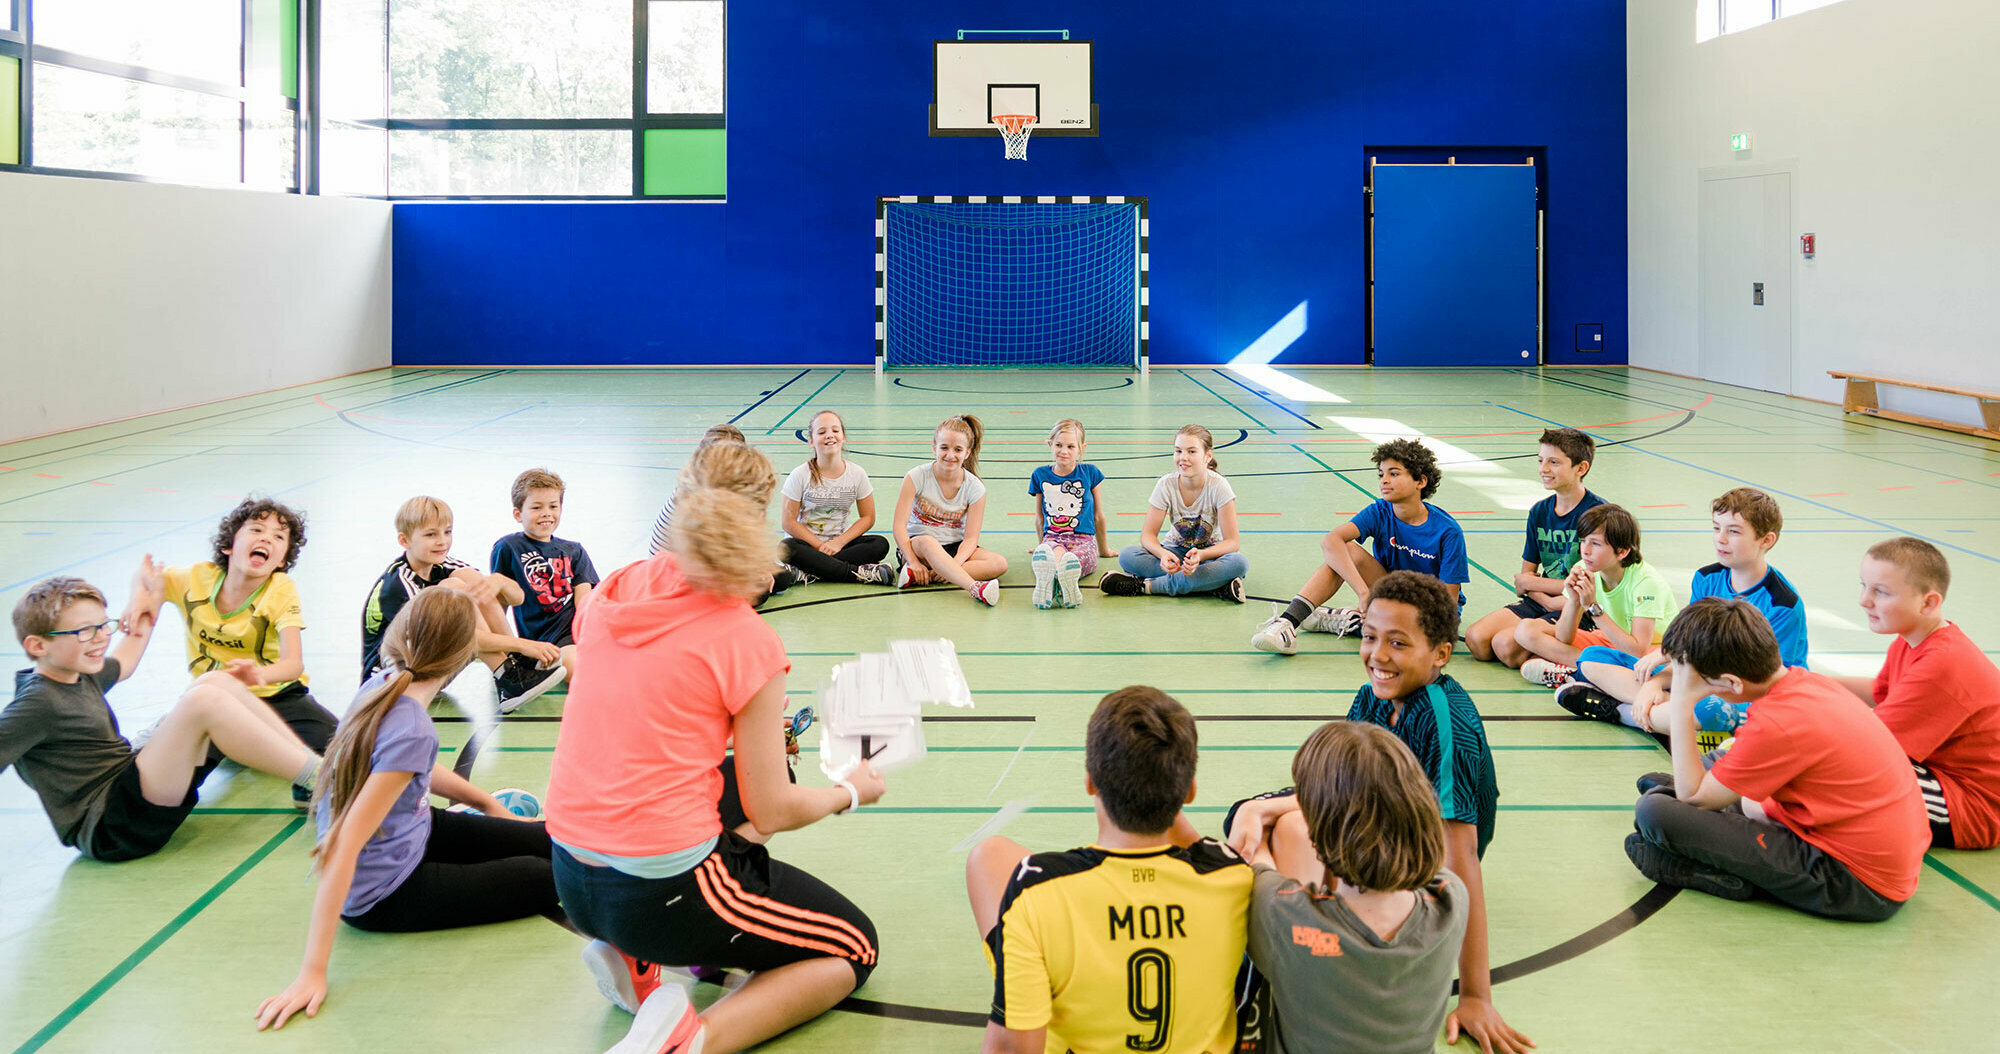 In a modern gymnasium, a sports teacher gathers her students seated in a circle and gives instructions.